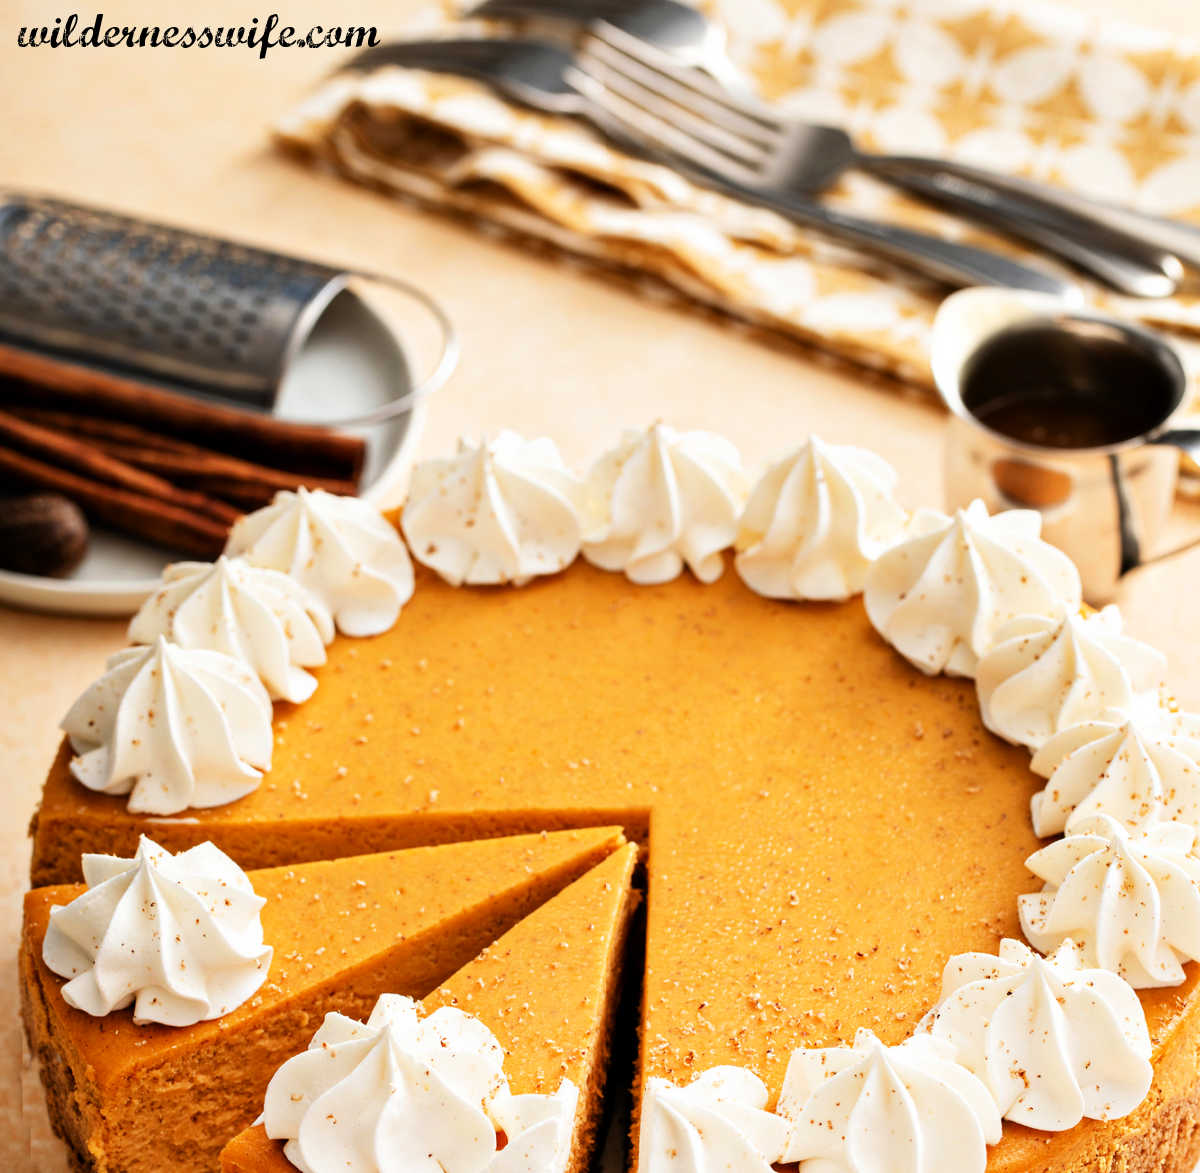 Pumpkin Cheesecake enhanced with piped decorative homemade whipped cream